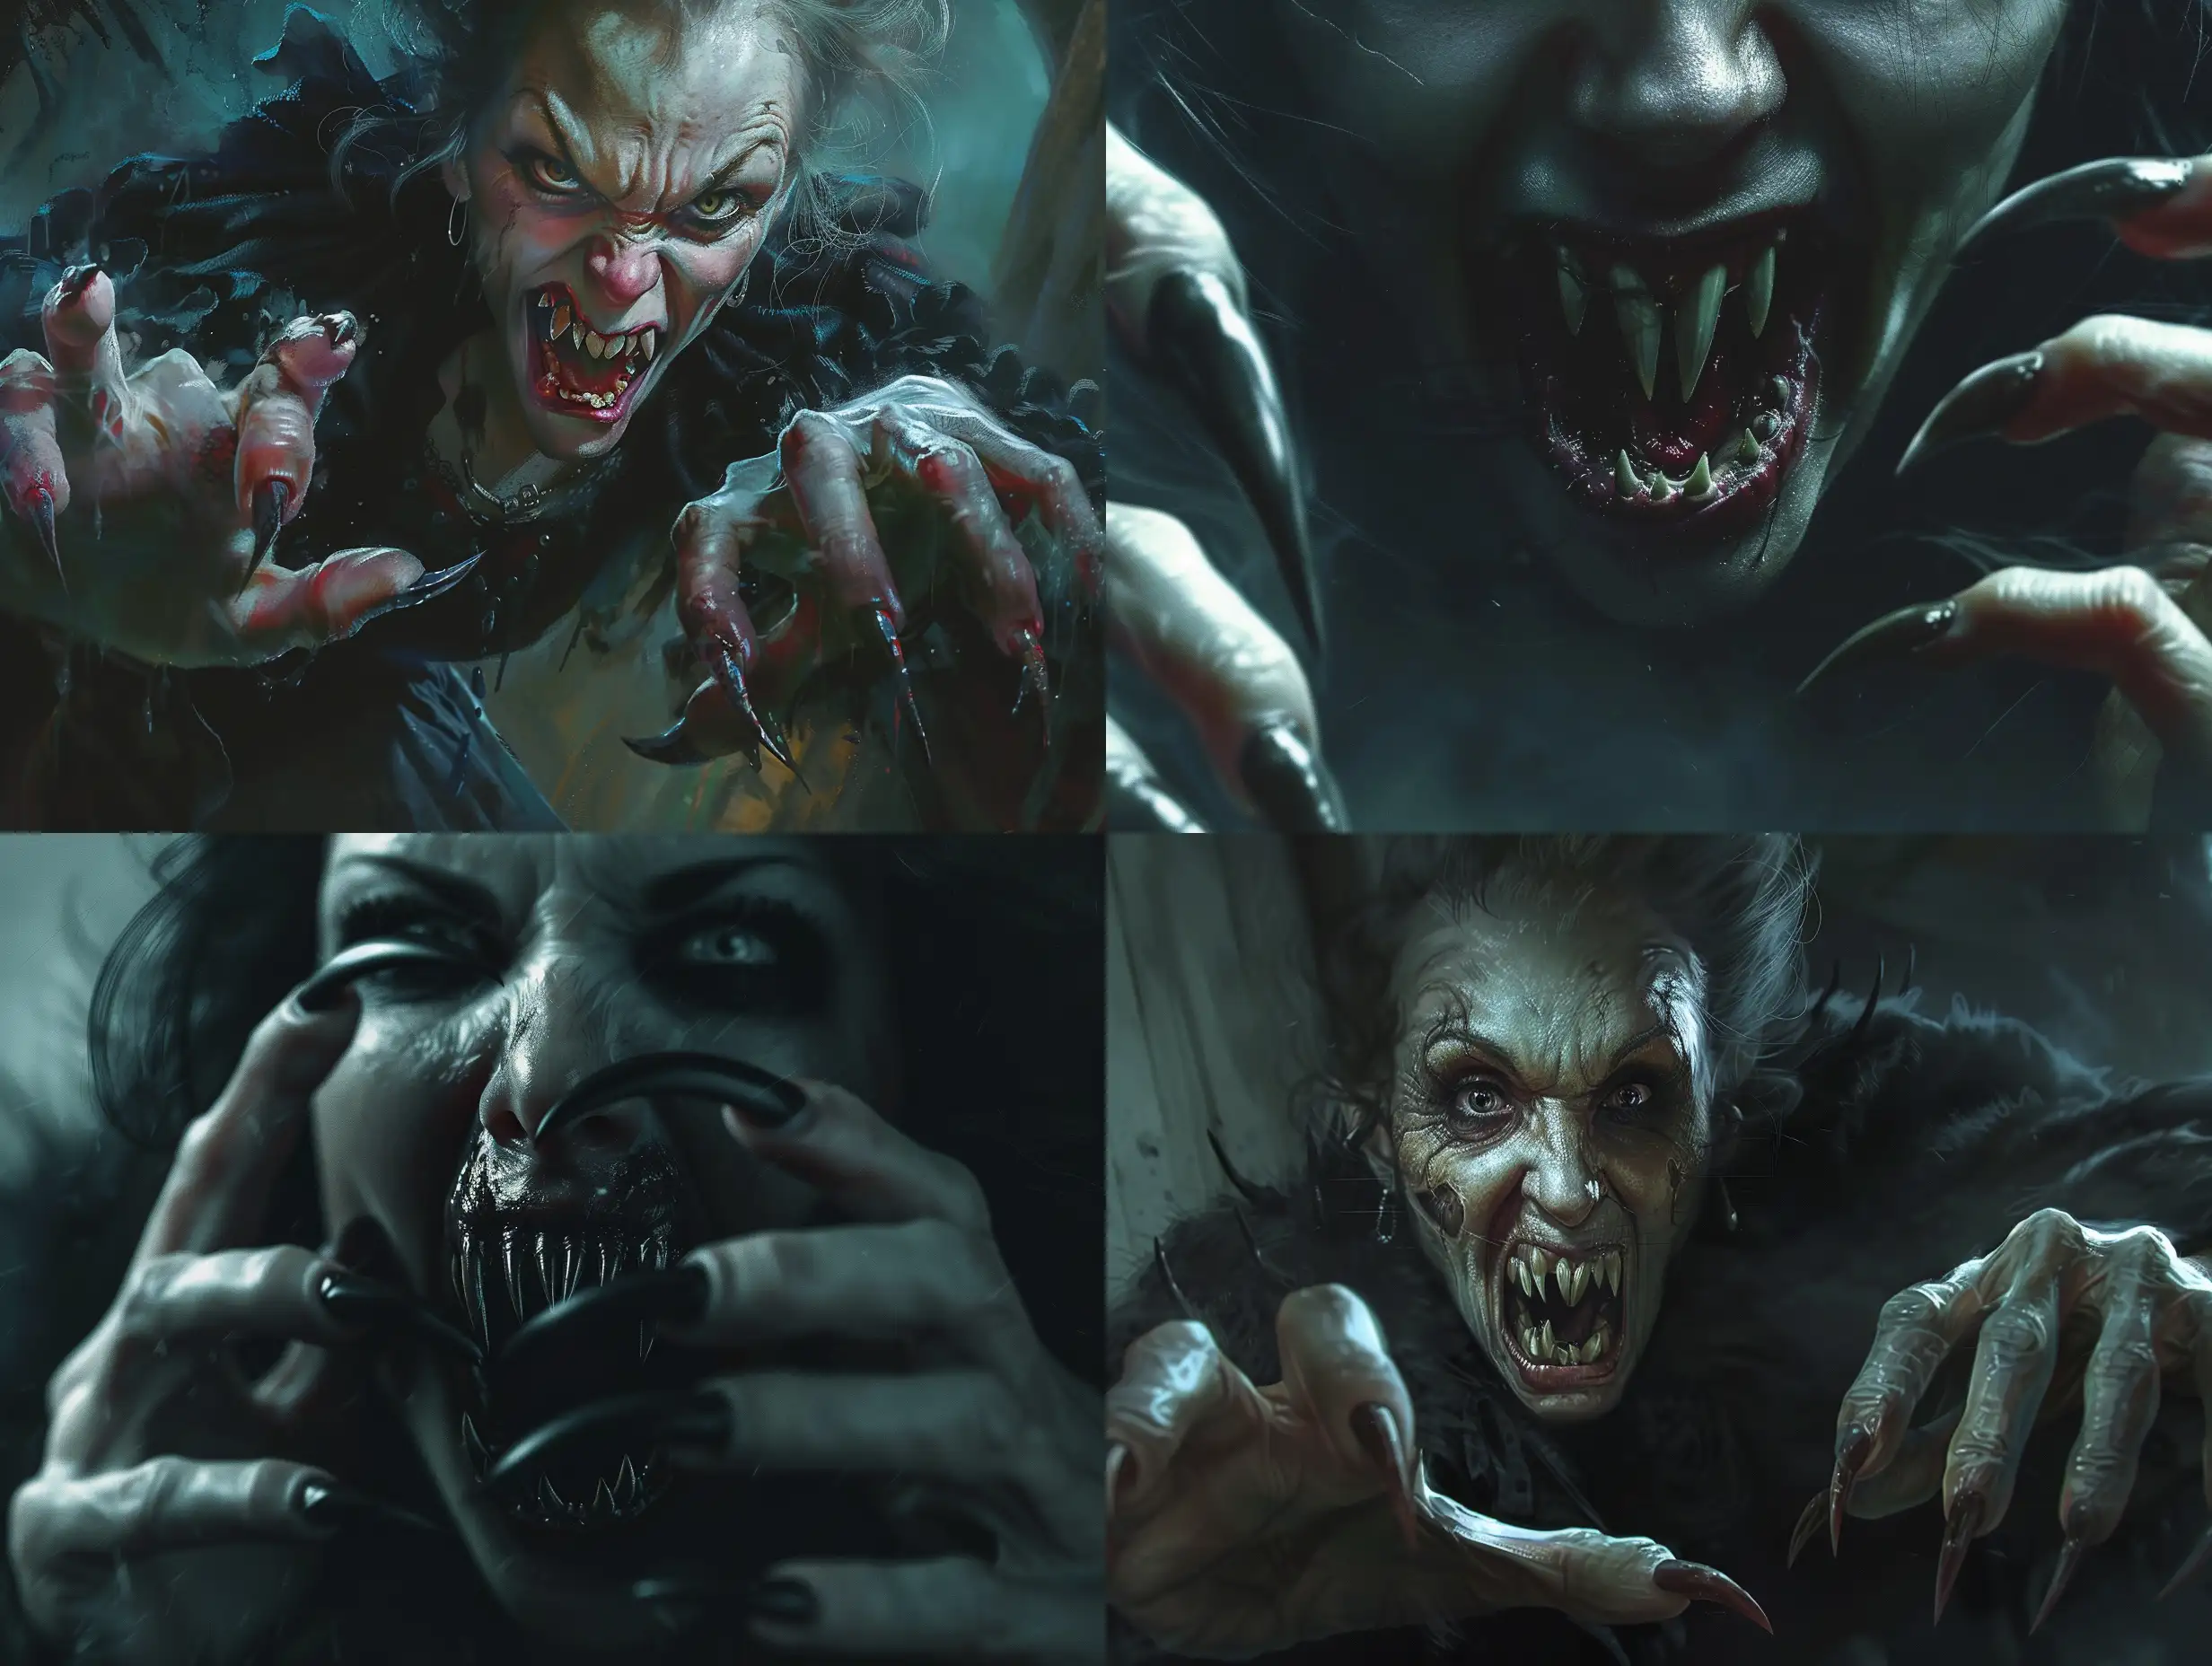 Photorealism nightmare scene of a monstrous female vampire with long, curved, pointed nails, exuding an aggressive and terrifying presence. Her pointed, crooked teeth form a scary expression amidst a dark and atmospheric setting. The high-quality depiction should capture the aggressive attack, emphasizing her predatory fangs and detailed nails in a hyper-realistic manner. The lighting should contribute to the horror atmosphere, ensuring a full-body portrayal with realistic hyper-detail. The character design should convey a playful yet menacing quality, with full anatomical accuracy including distinctly human hands with five fingers. The final image must be very clear without flaws, portraying the vampire with unparalleled photorealism. 